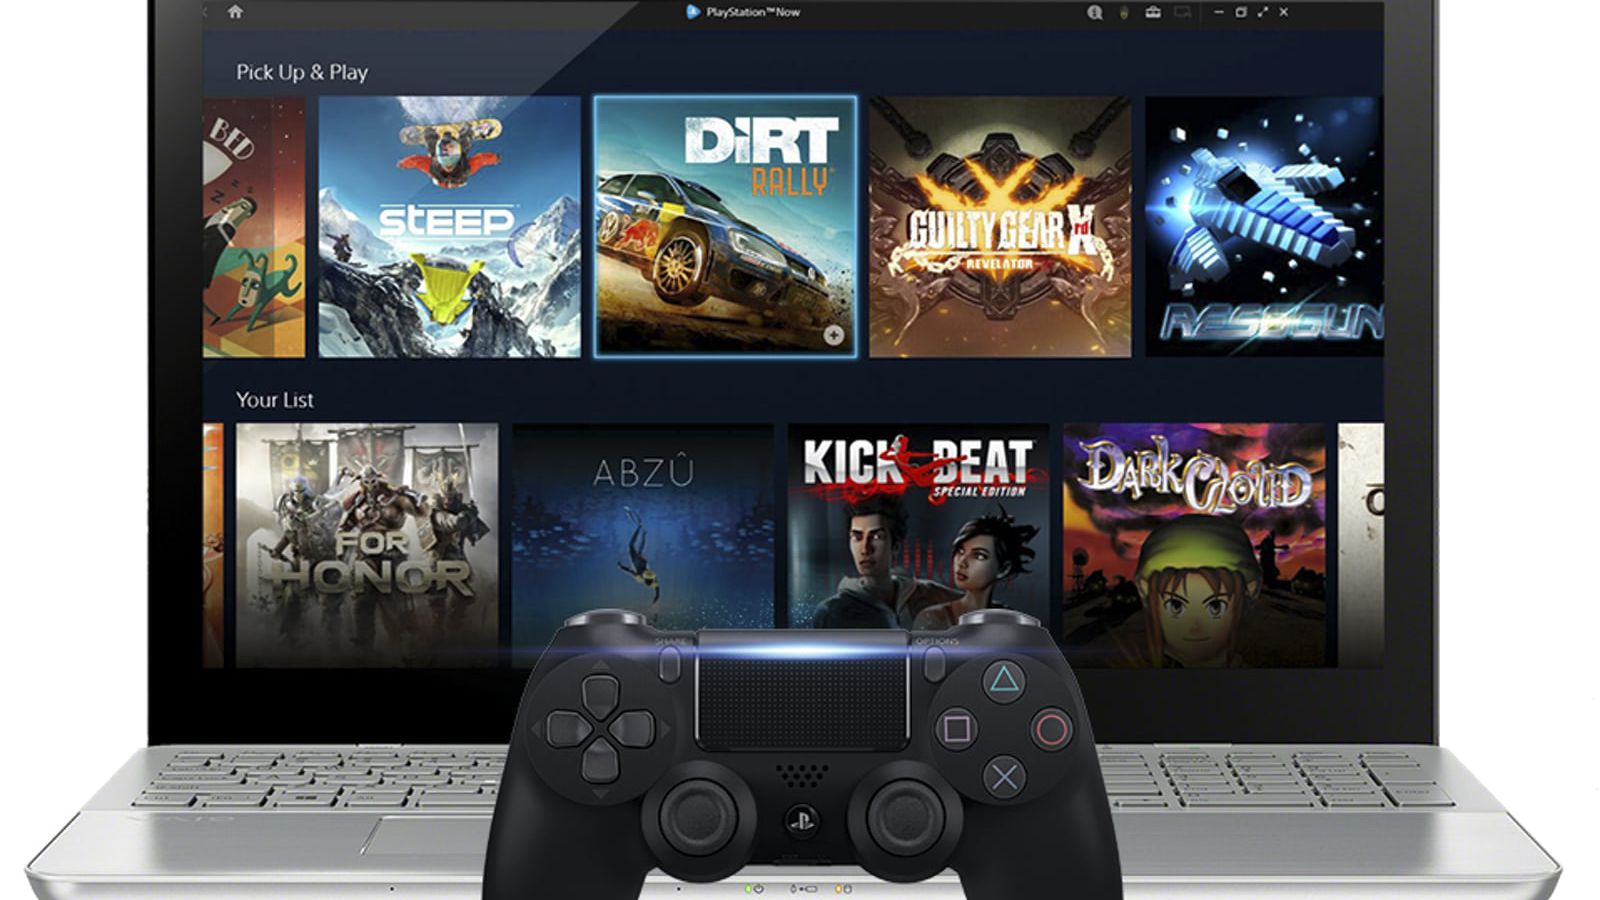 The PS Now PC app has been updated to the PS Plus app, but if you